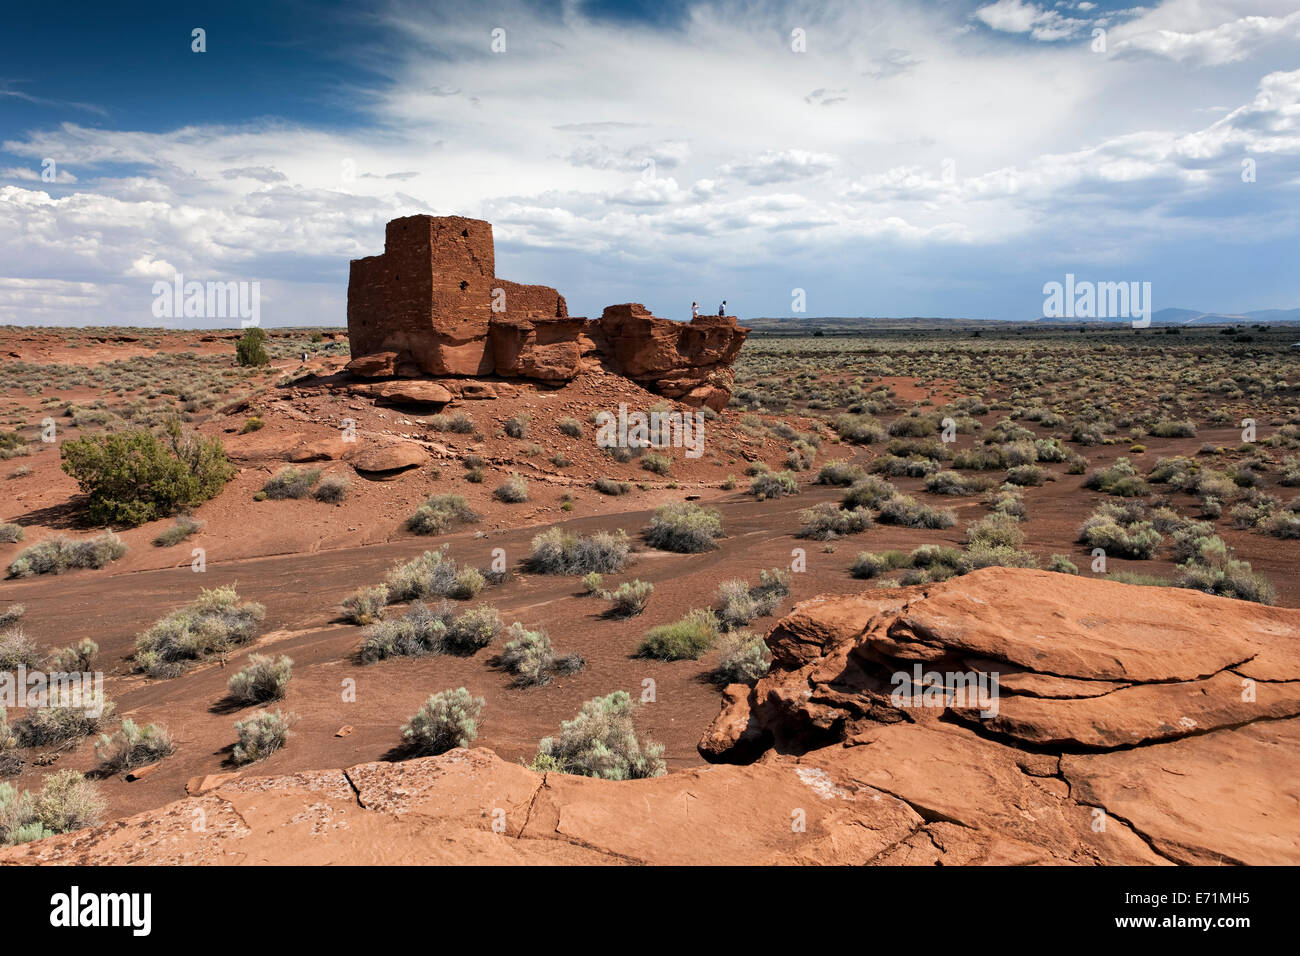 Wukoki Ruins - The Wupatki National Monument is a National Monument located in north-central Arizona, near Flagstaff. Stock Photo